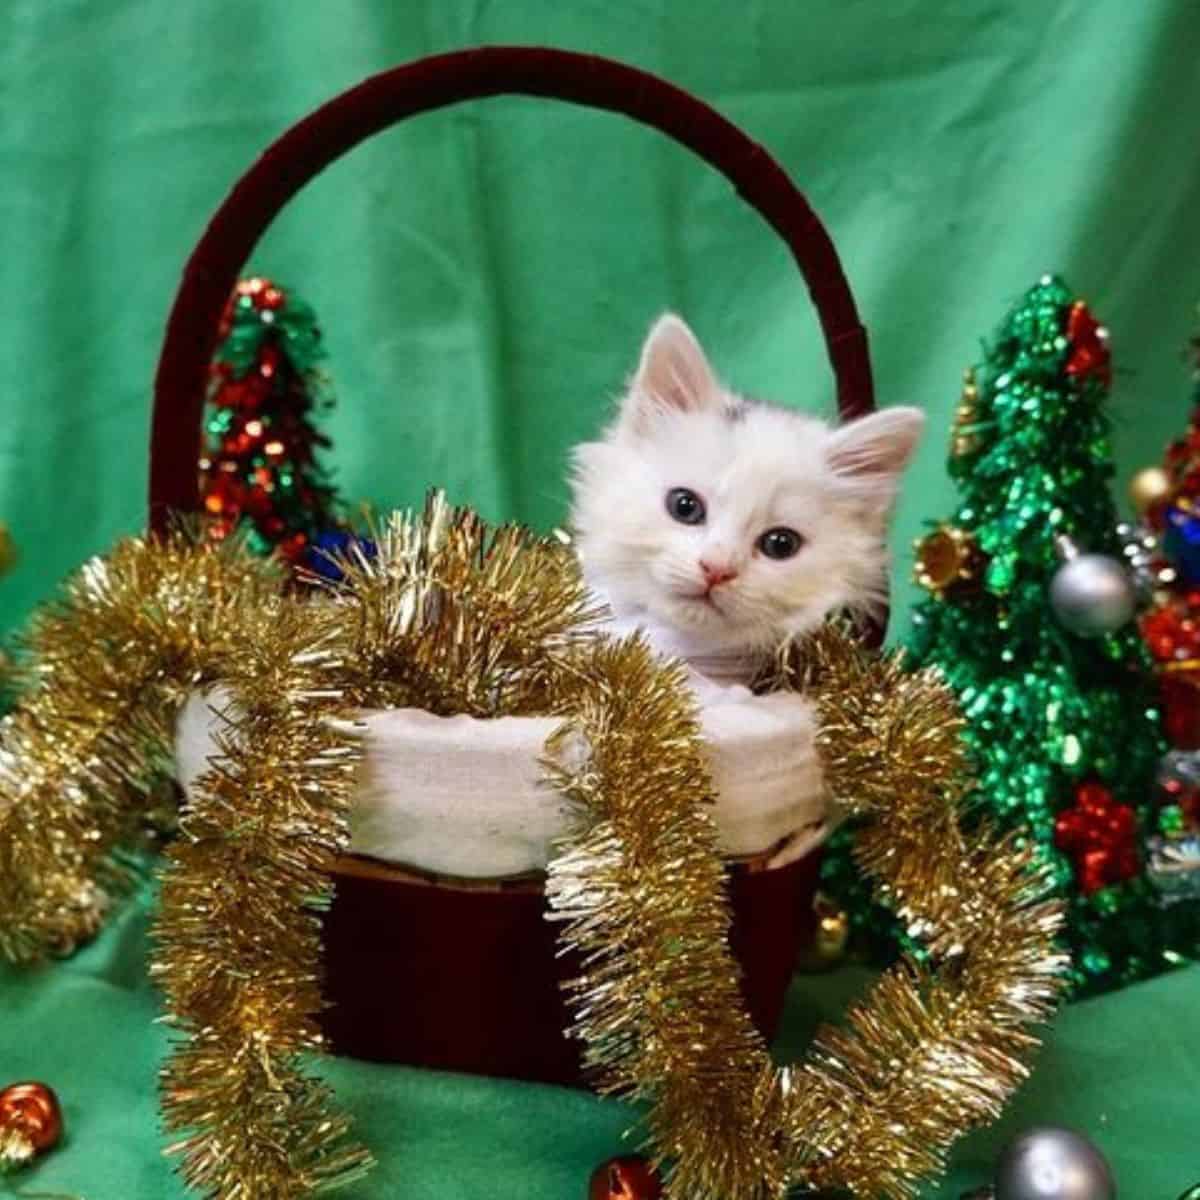 kitten in a basket with christmas decorations